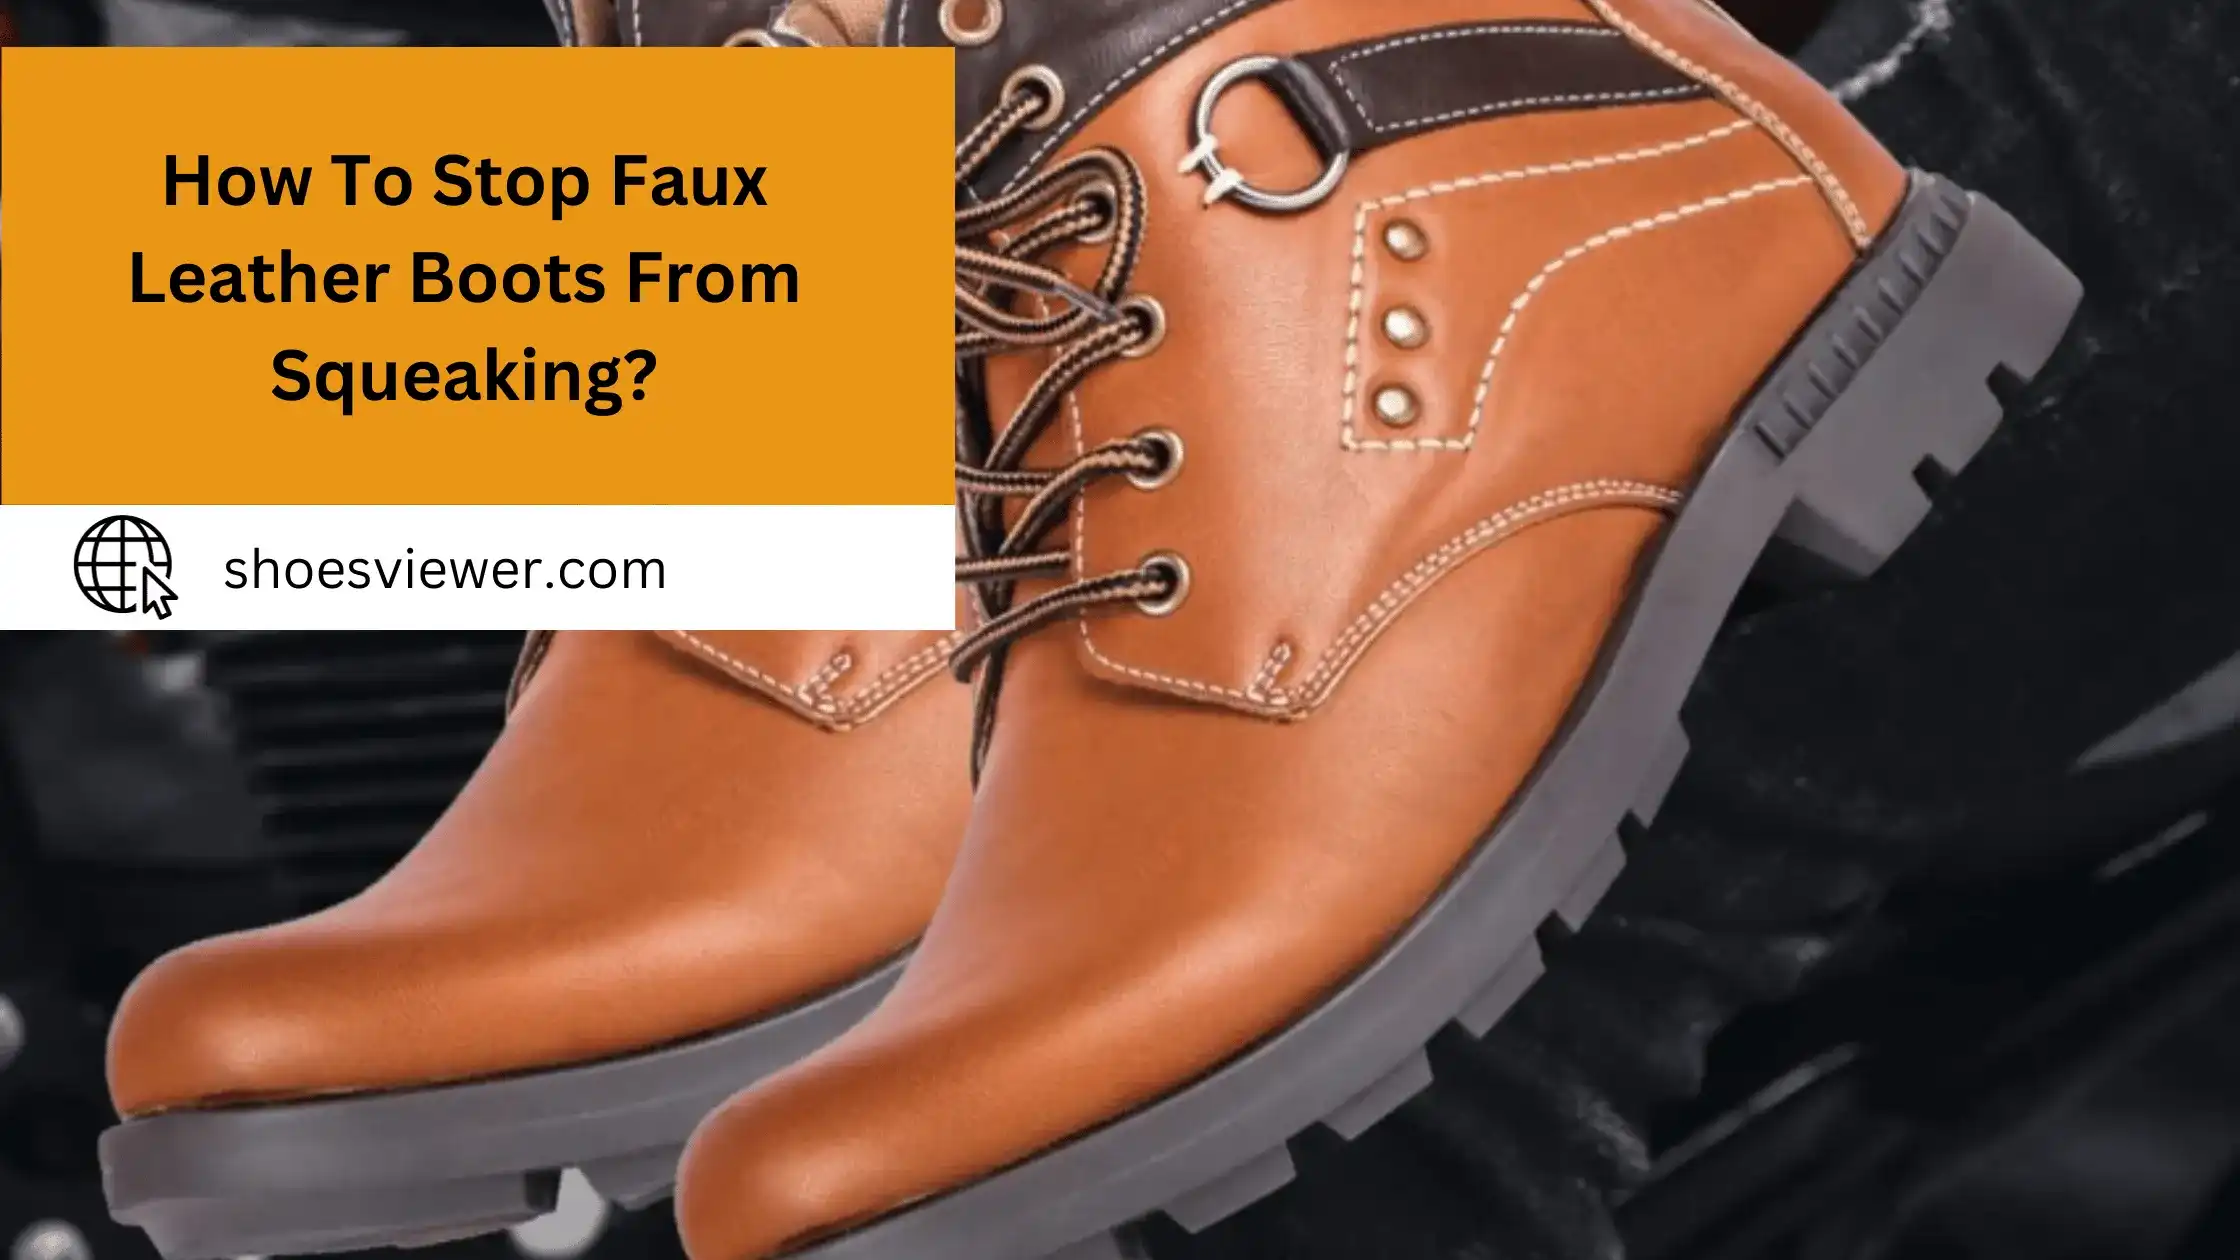 How To Stop Faux Leather Boots From Squeaking? Pro Tips